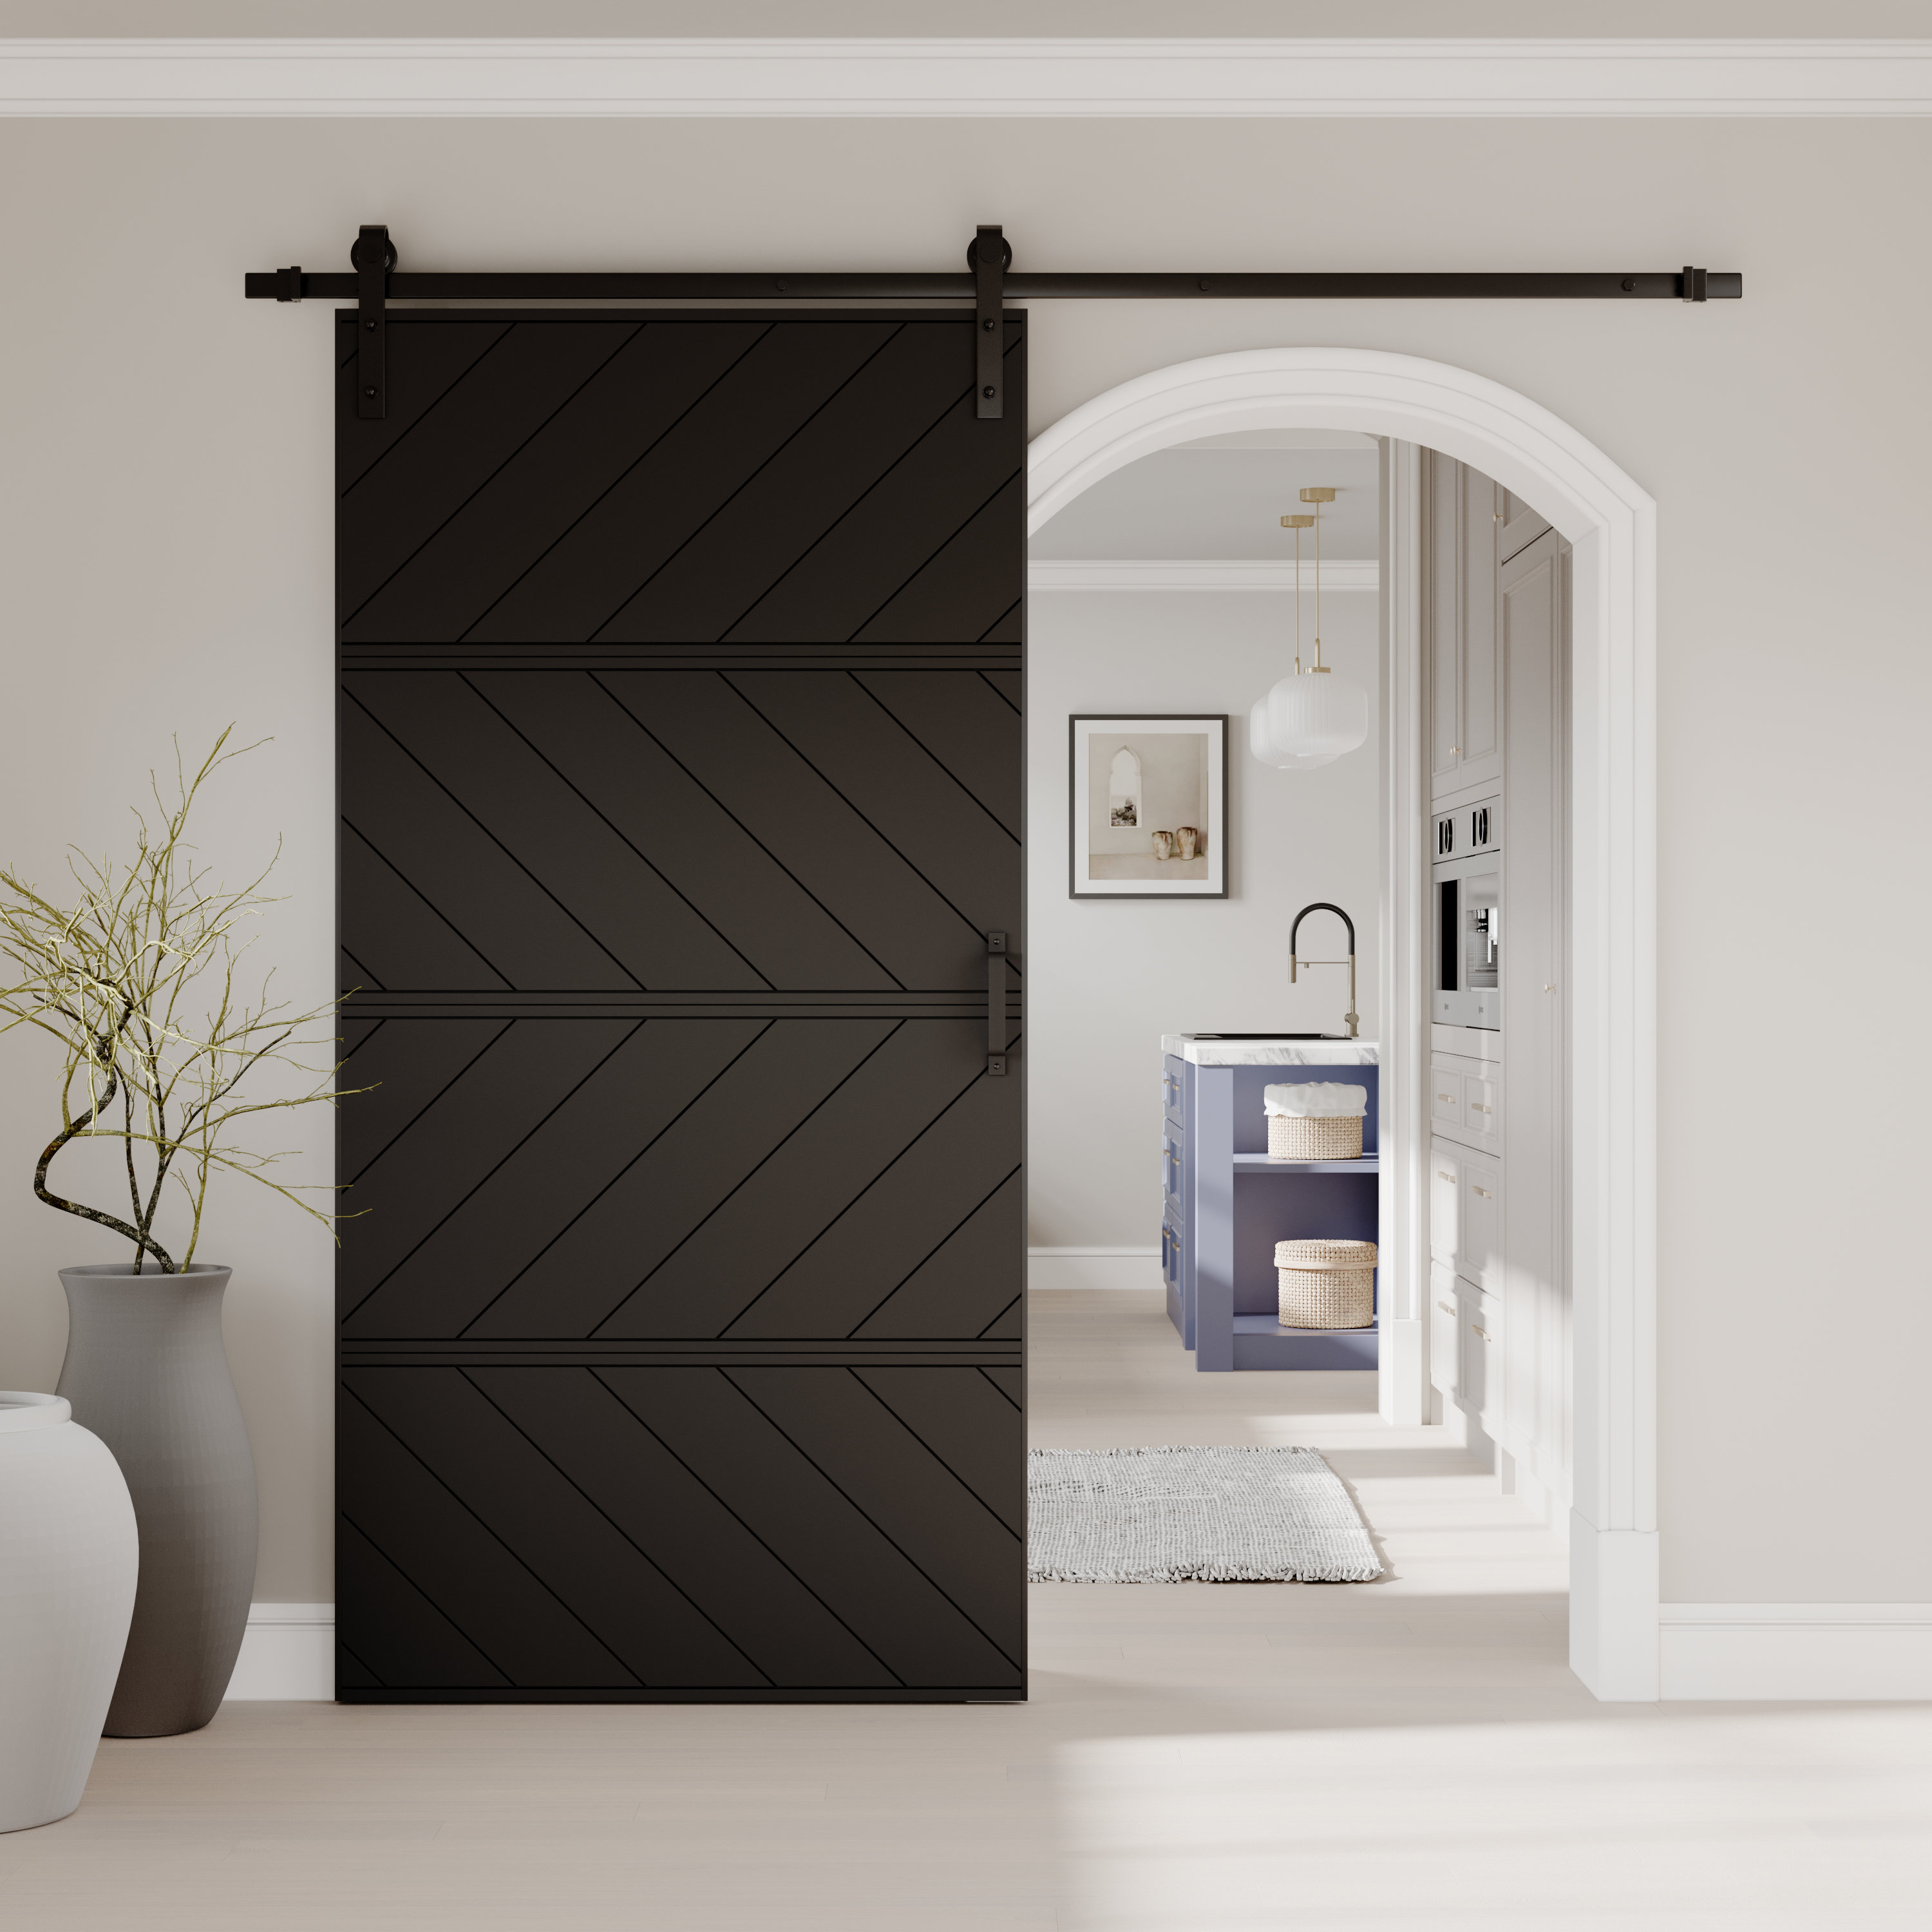 Black Chevron Paneled Door Redo - Before and After Photos